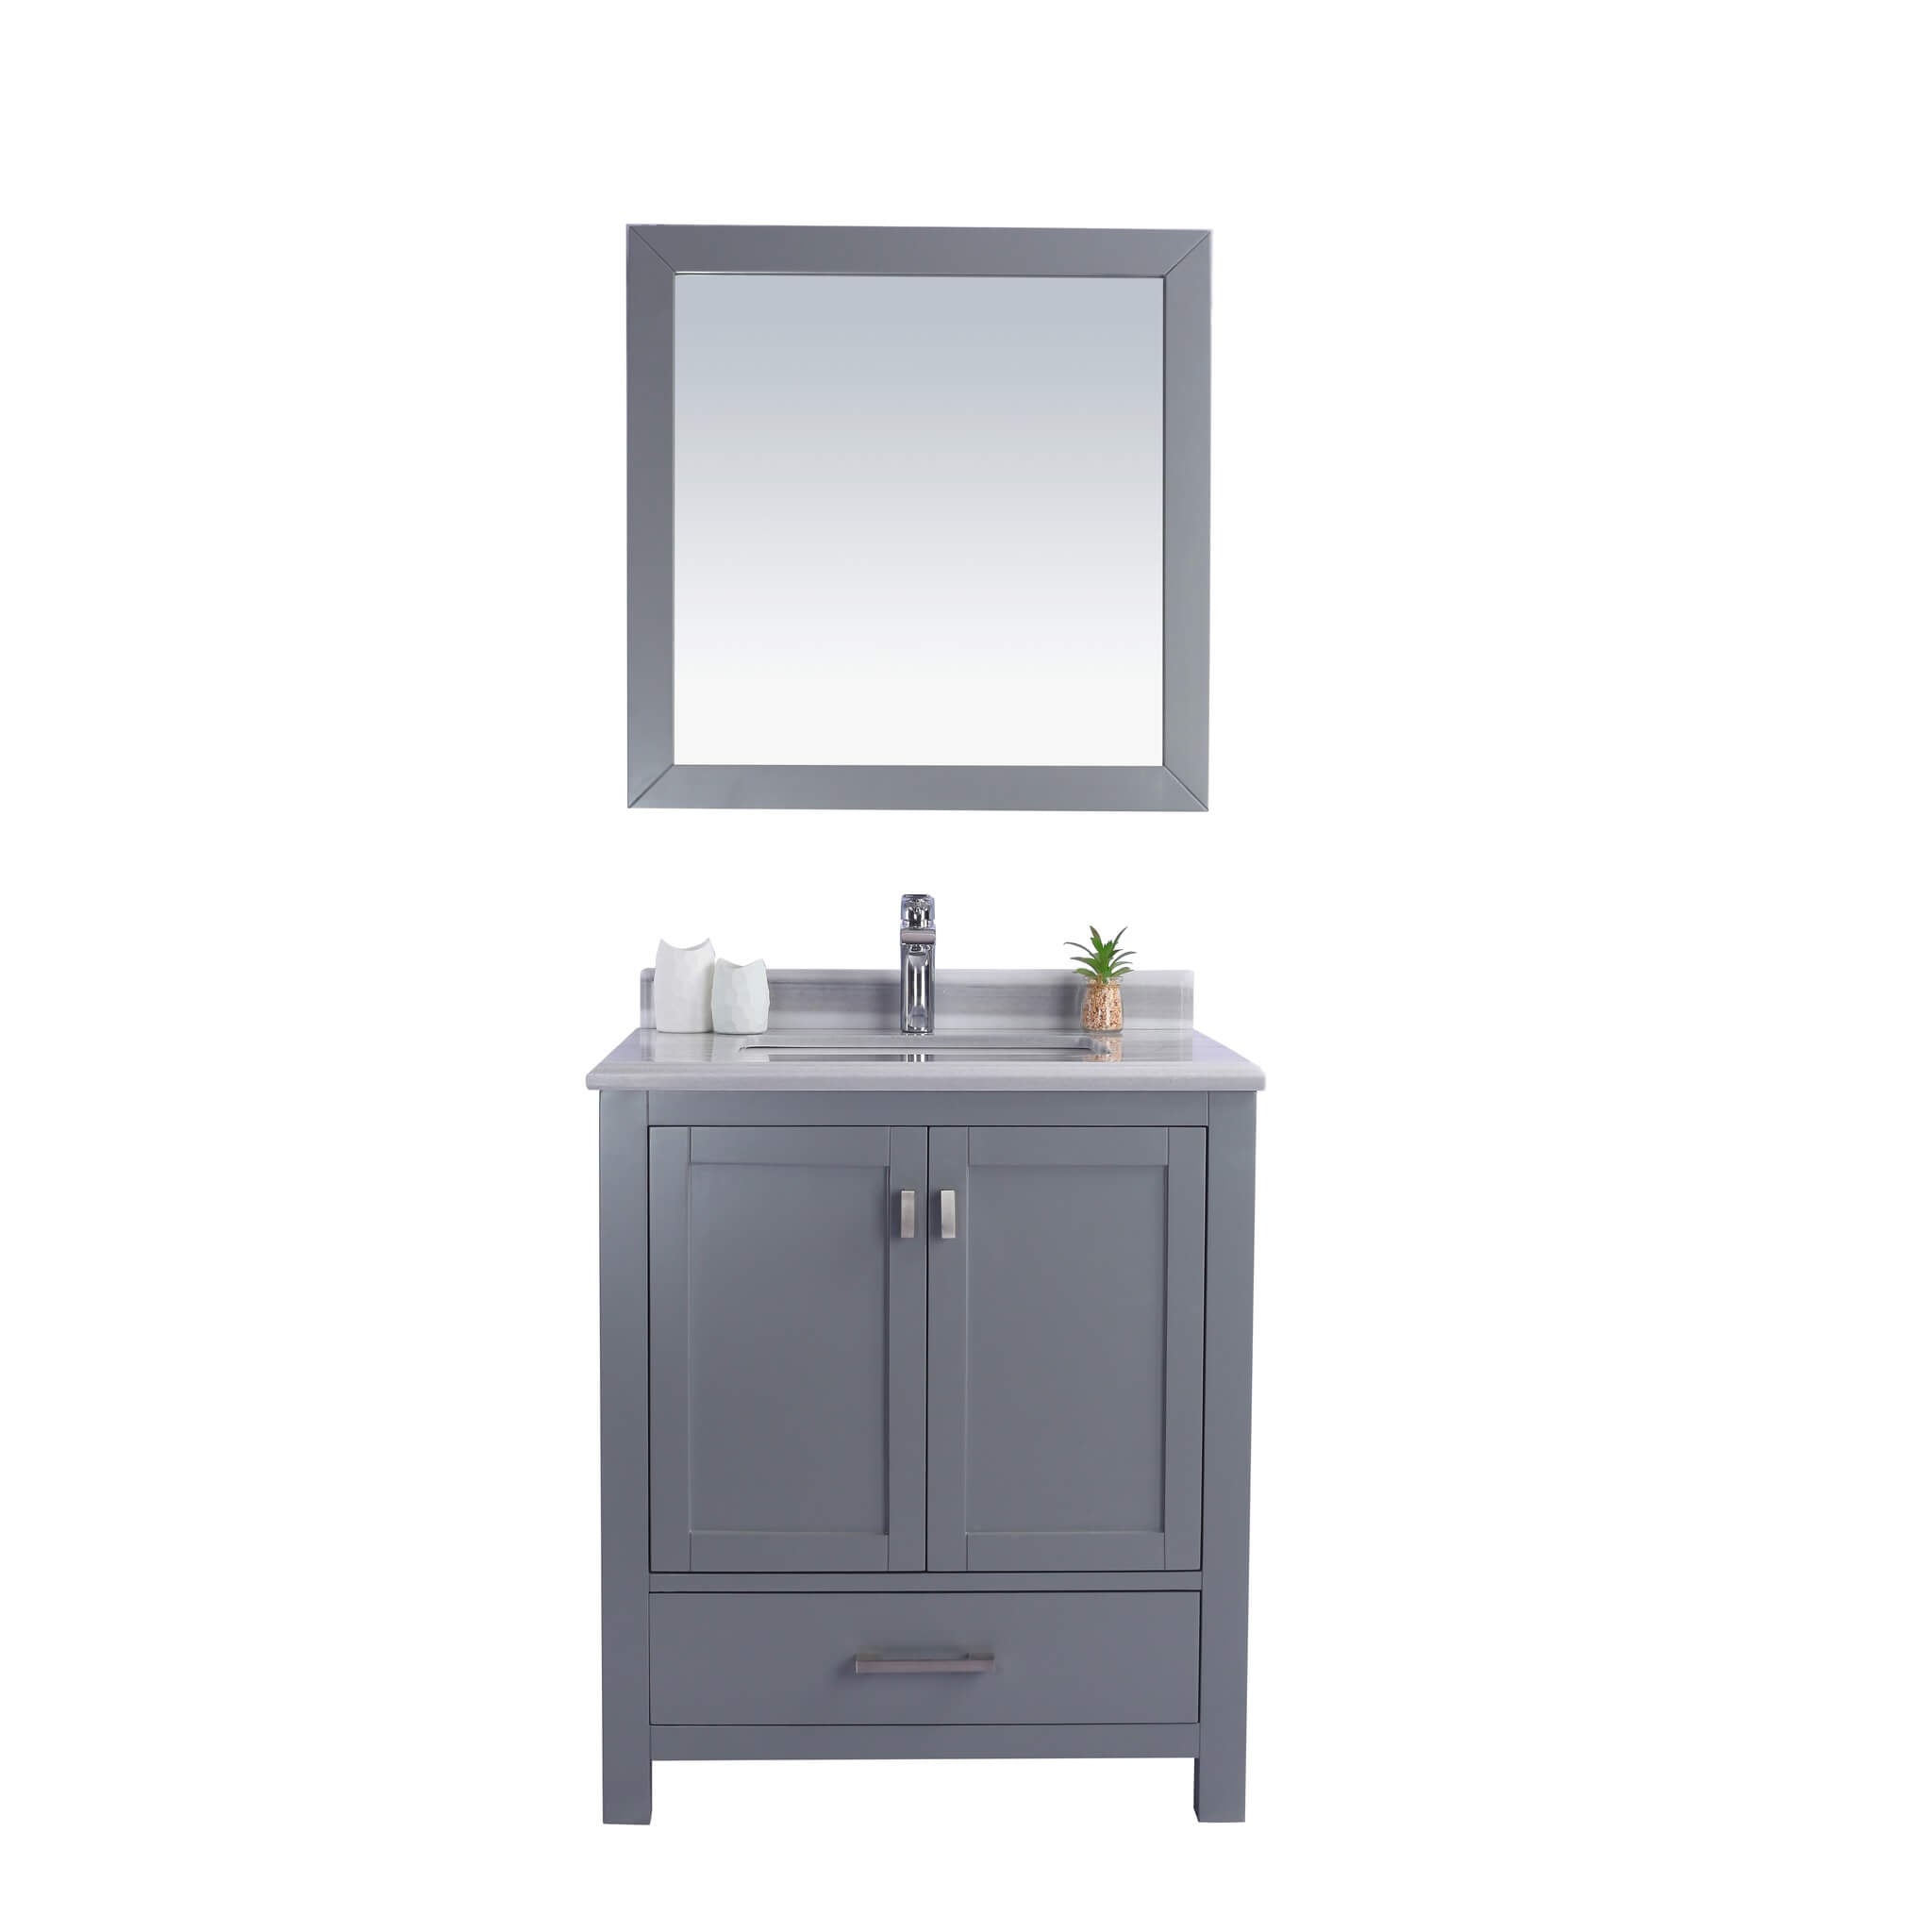 LAVIVA Wilson 313ANG-30G-WS 30" Single Bathroom Vanity in Grey with White Stripes Marble, White Rectangle Sink, Front View